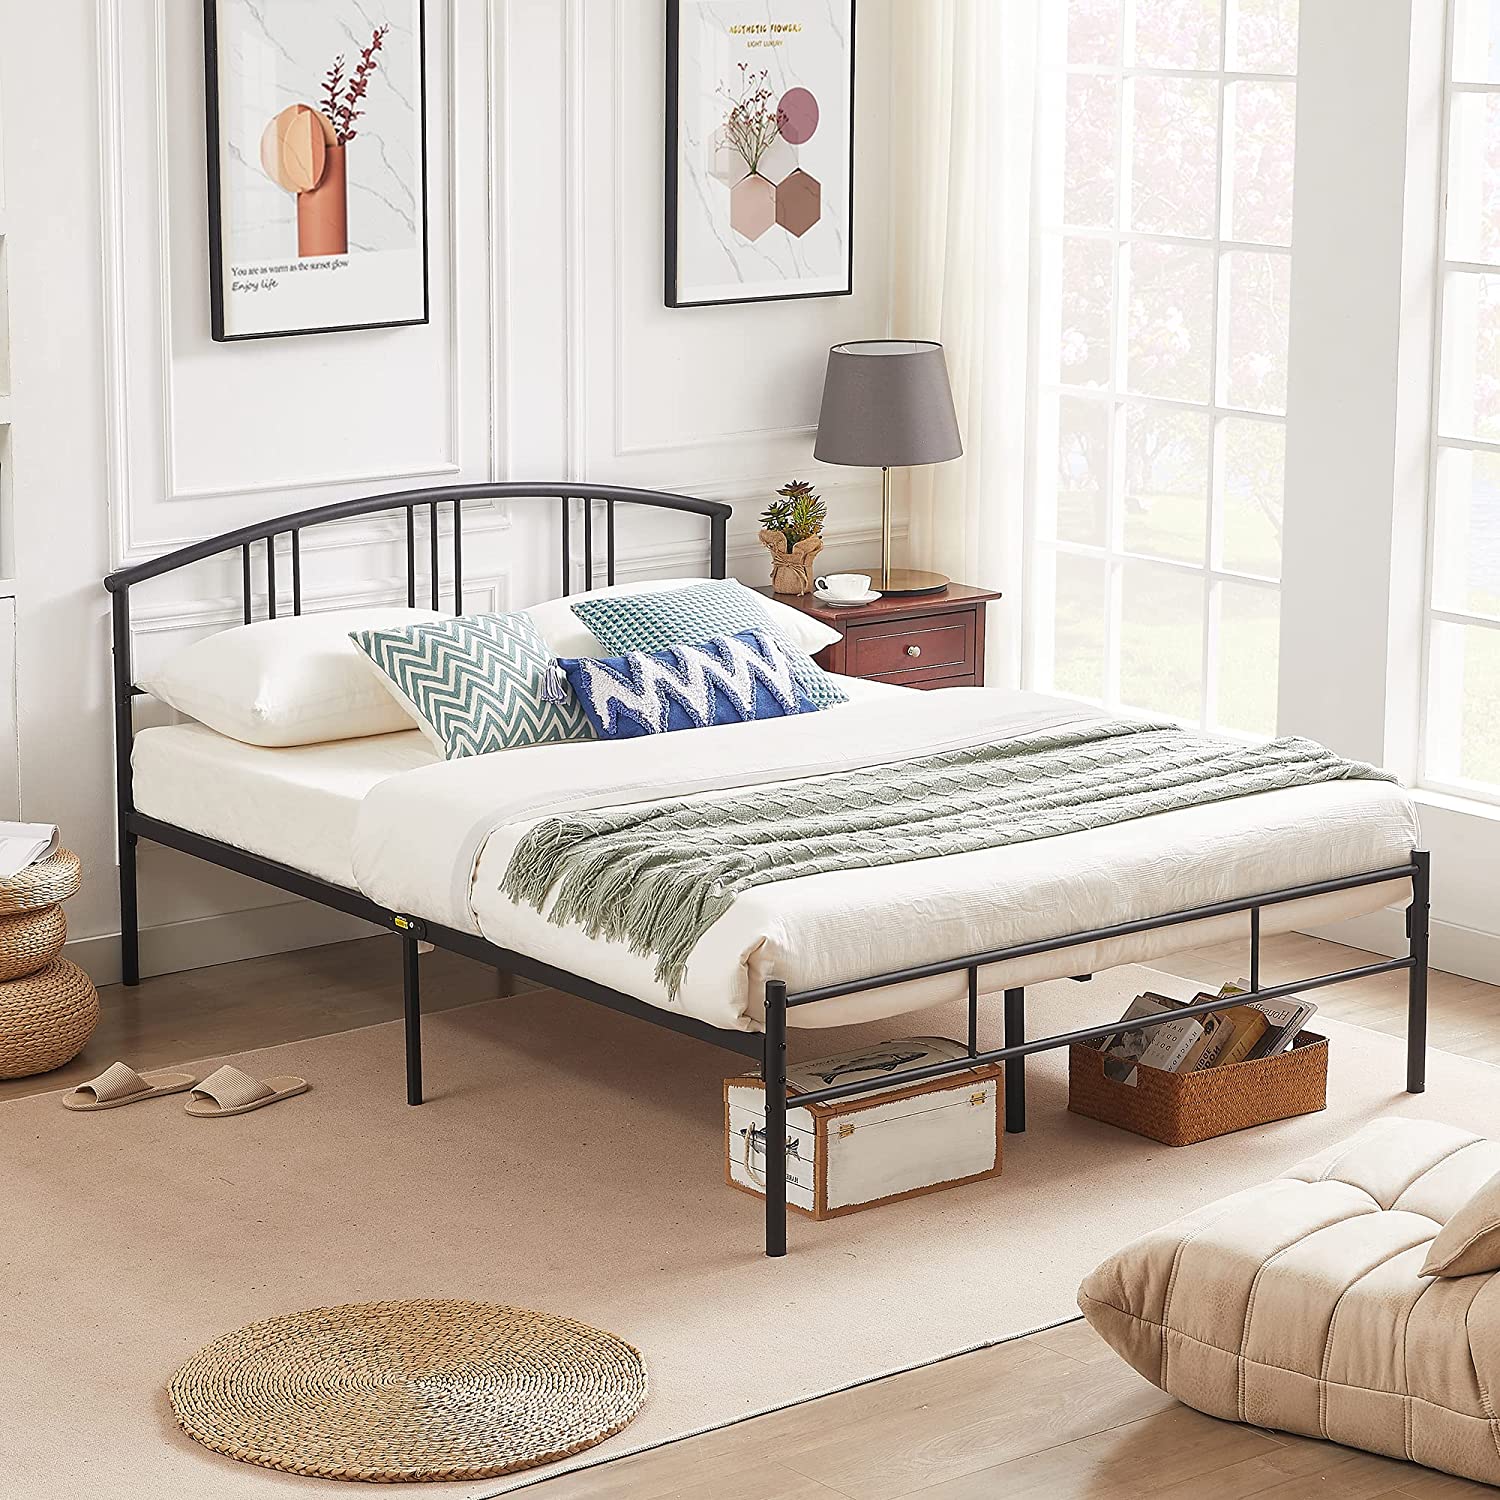 VECELO Modern Metal Bed Frame Mattress Foundation with curve headboard and Footboard